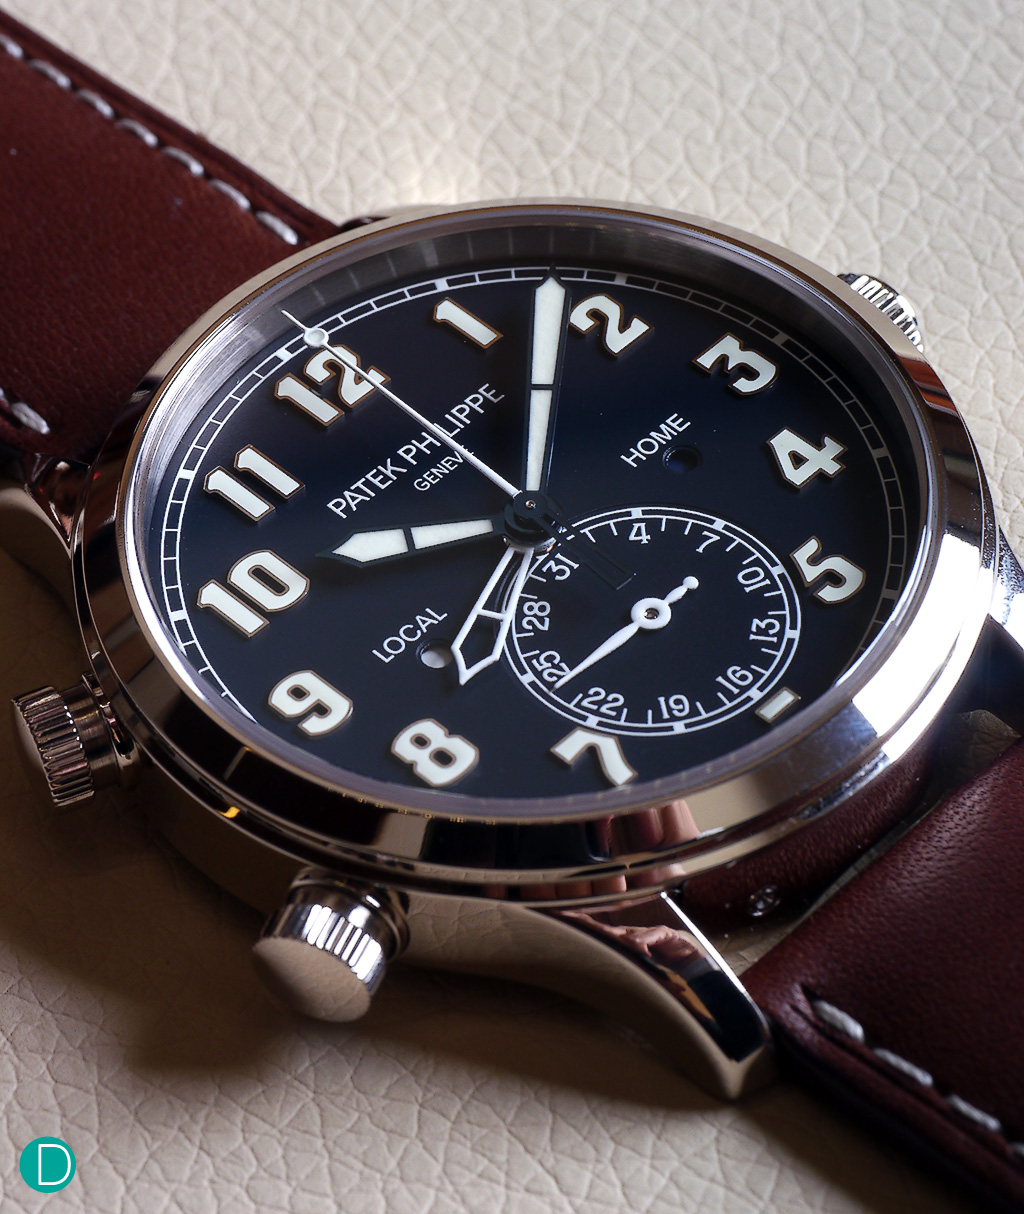 The Patek Philippe Calatrava Pilot Travel Time. This is perhaps the most controversial piece in tonight's article.